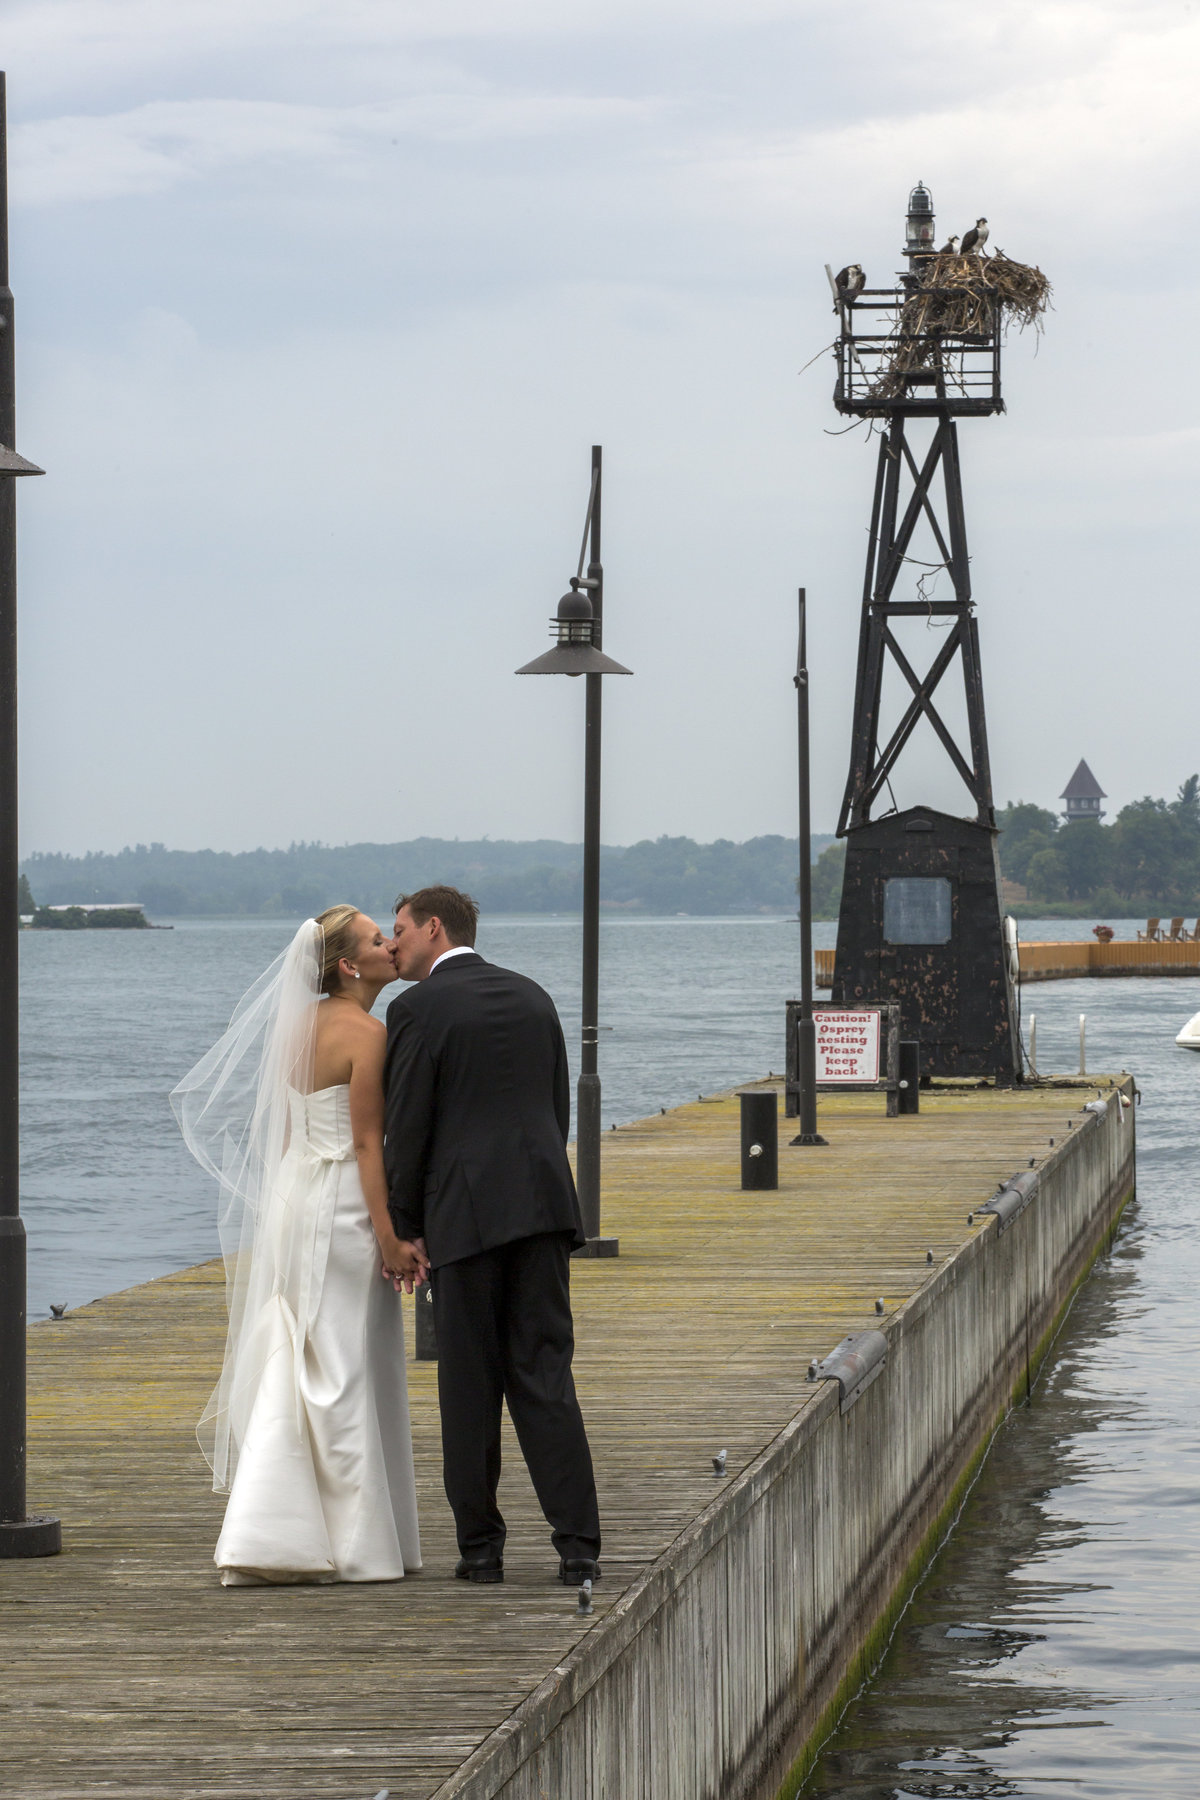 Empire West Photo is a professional wedding photographer in Clayton NY